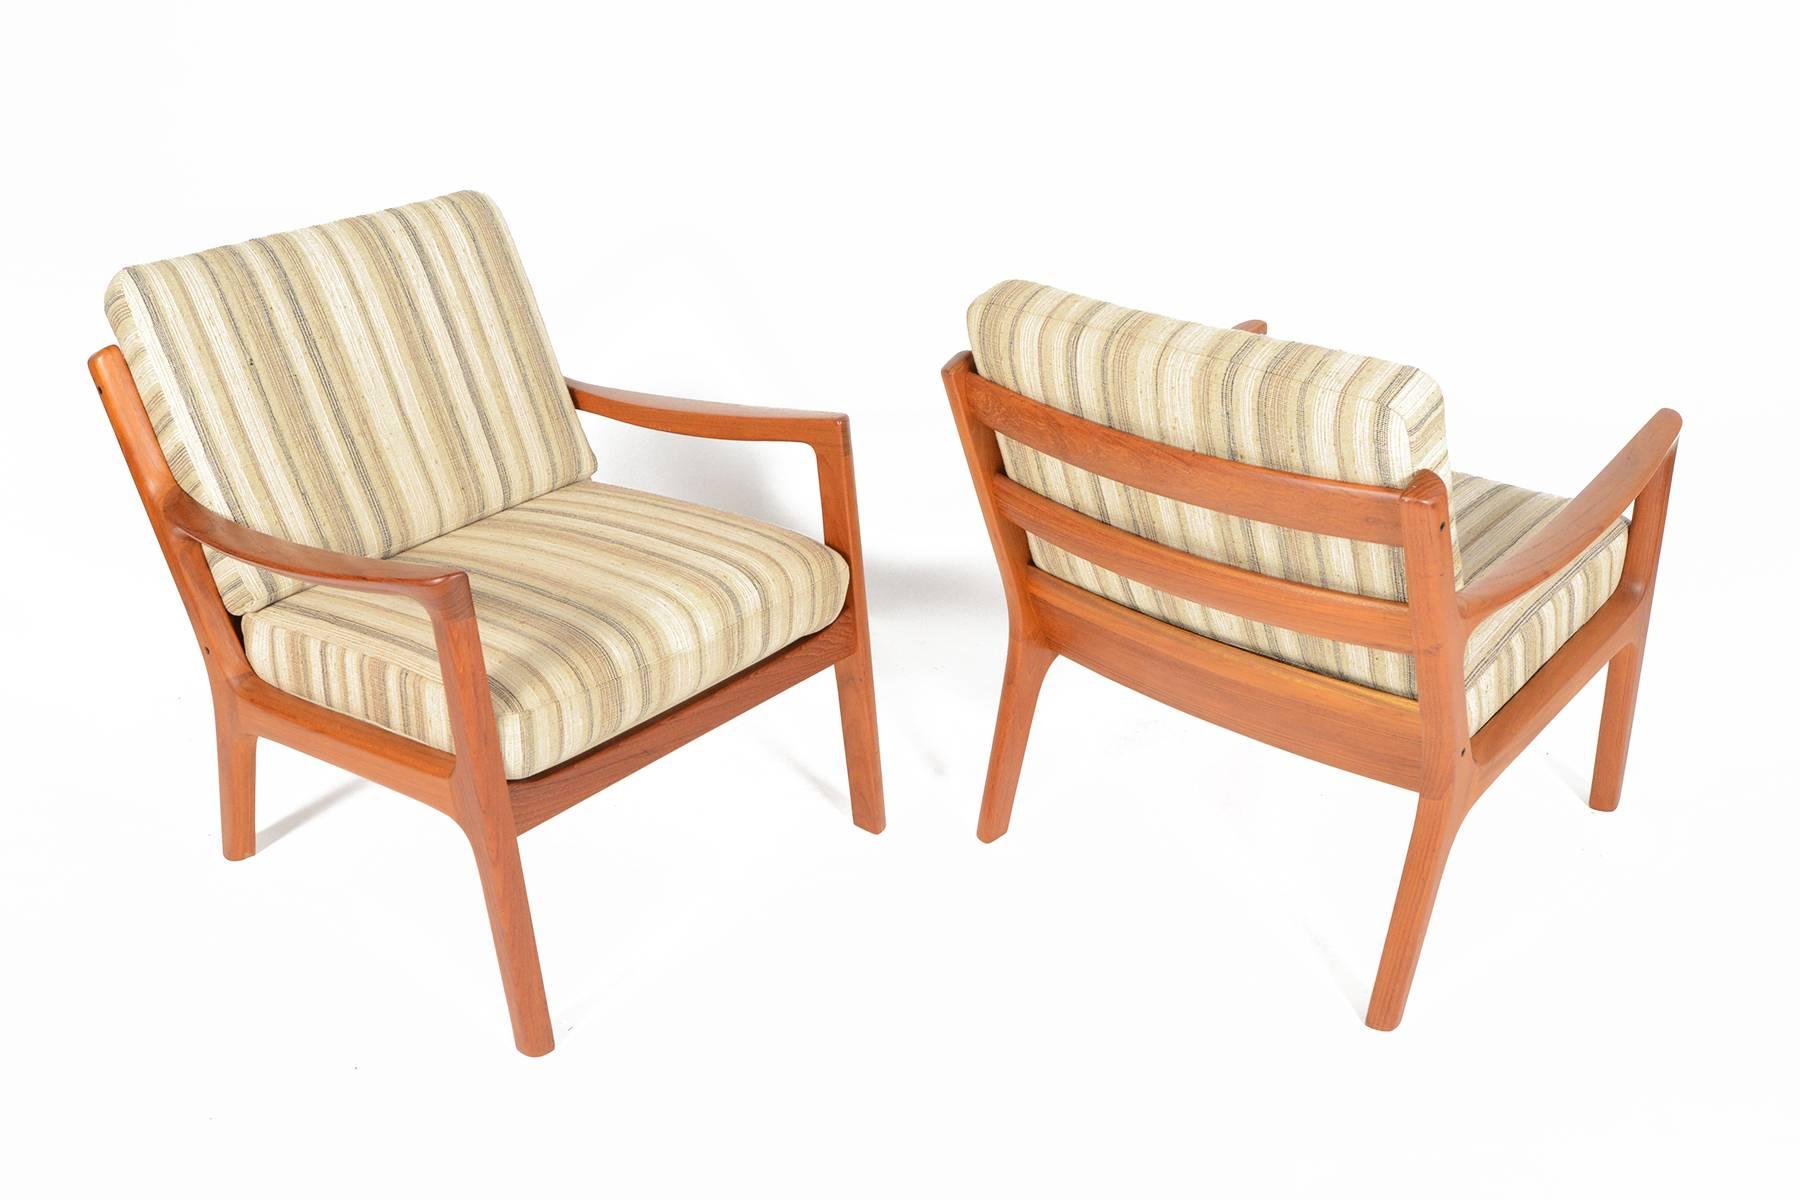 This pair of Senator Model 166 teak lounge chairs was designed by Ole Wanscher for Cado in the 1960s. Crafted in solid teak with understated elegant lines, this pair is extremely comfortable and will be a great addition to any modern collection.